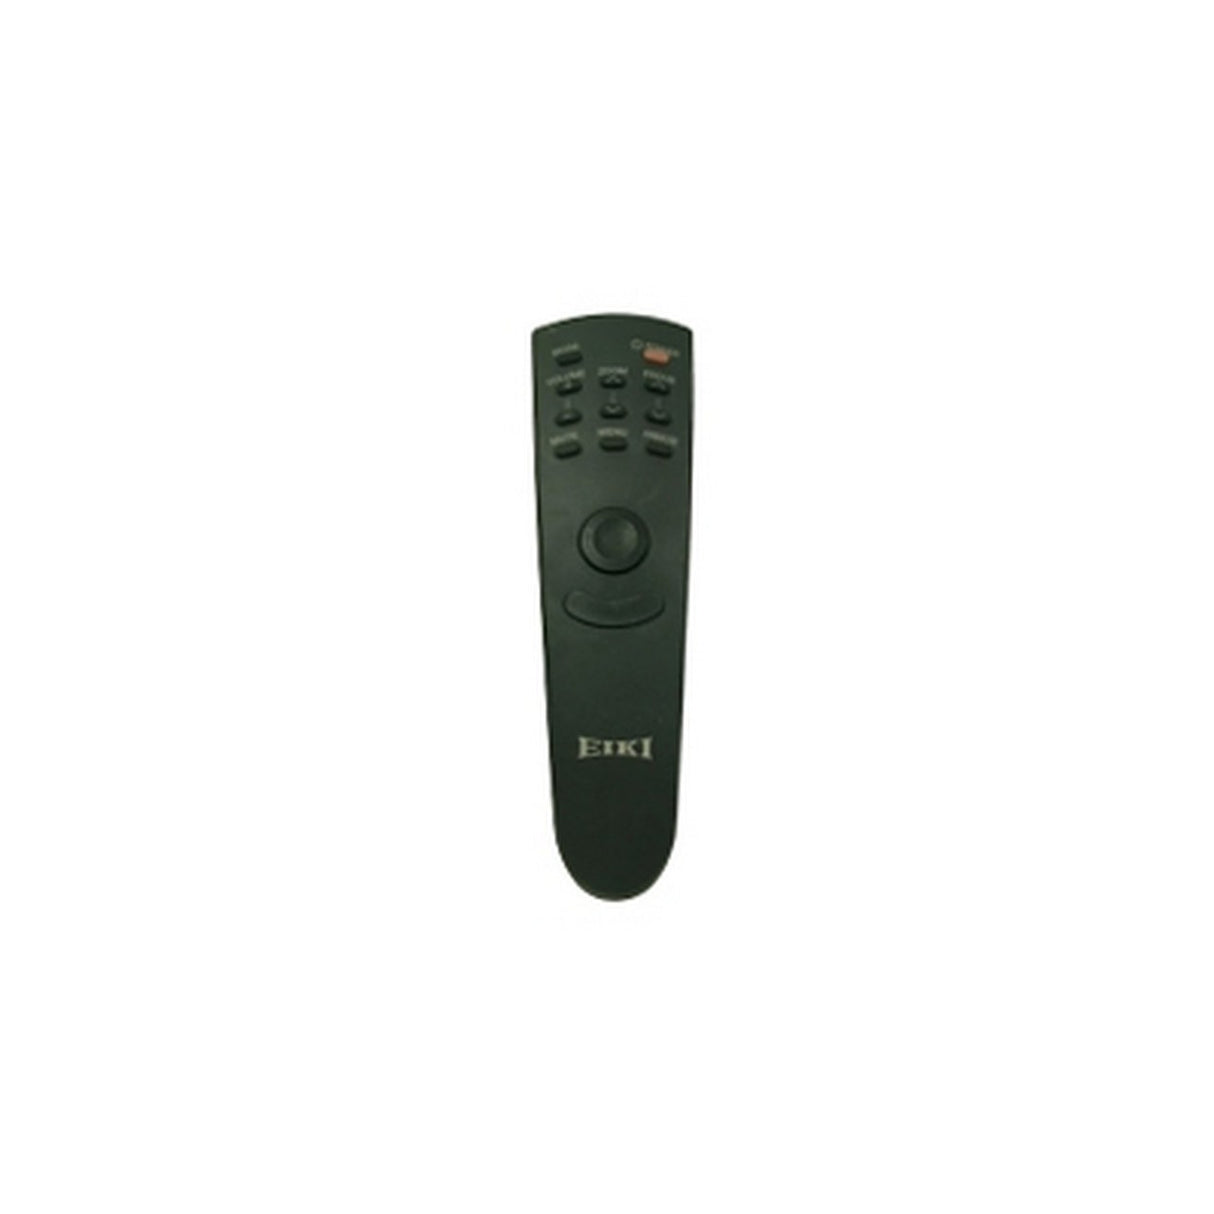 Eiki 645 020 7099 | Infrared Only Projector Remote for LC-7000